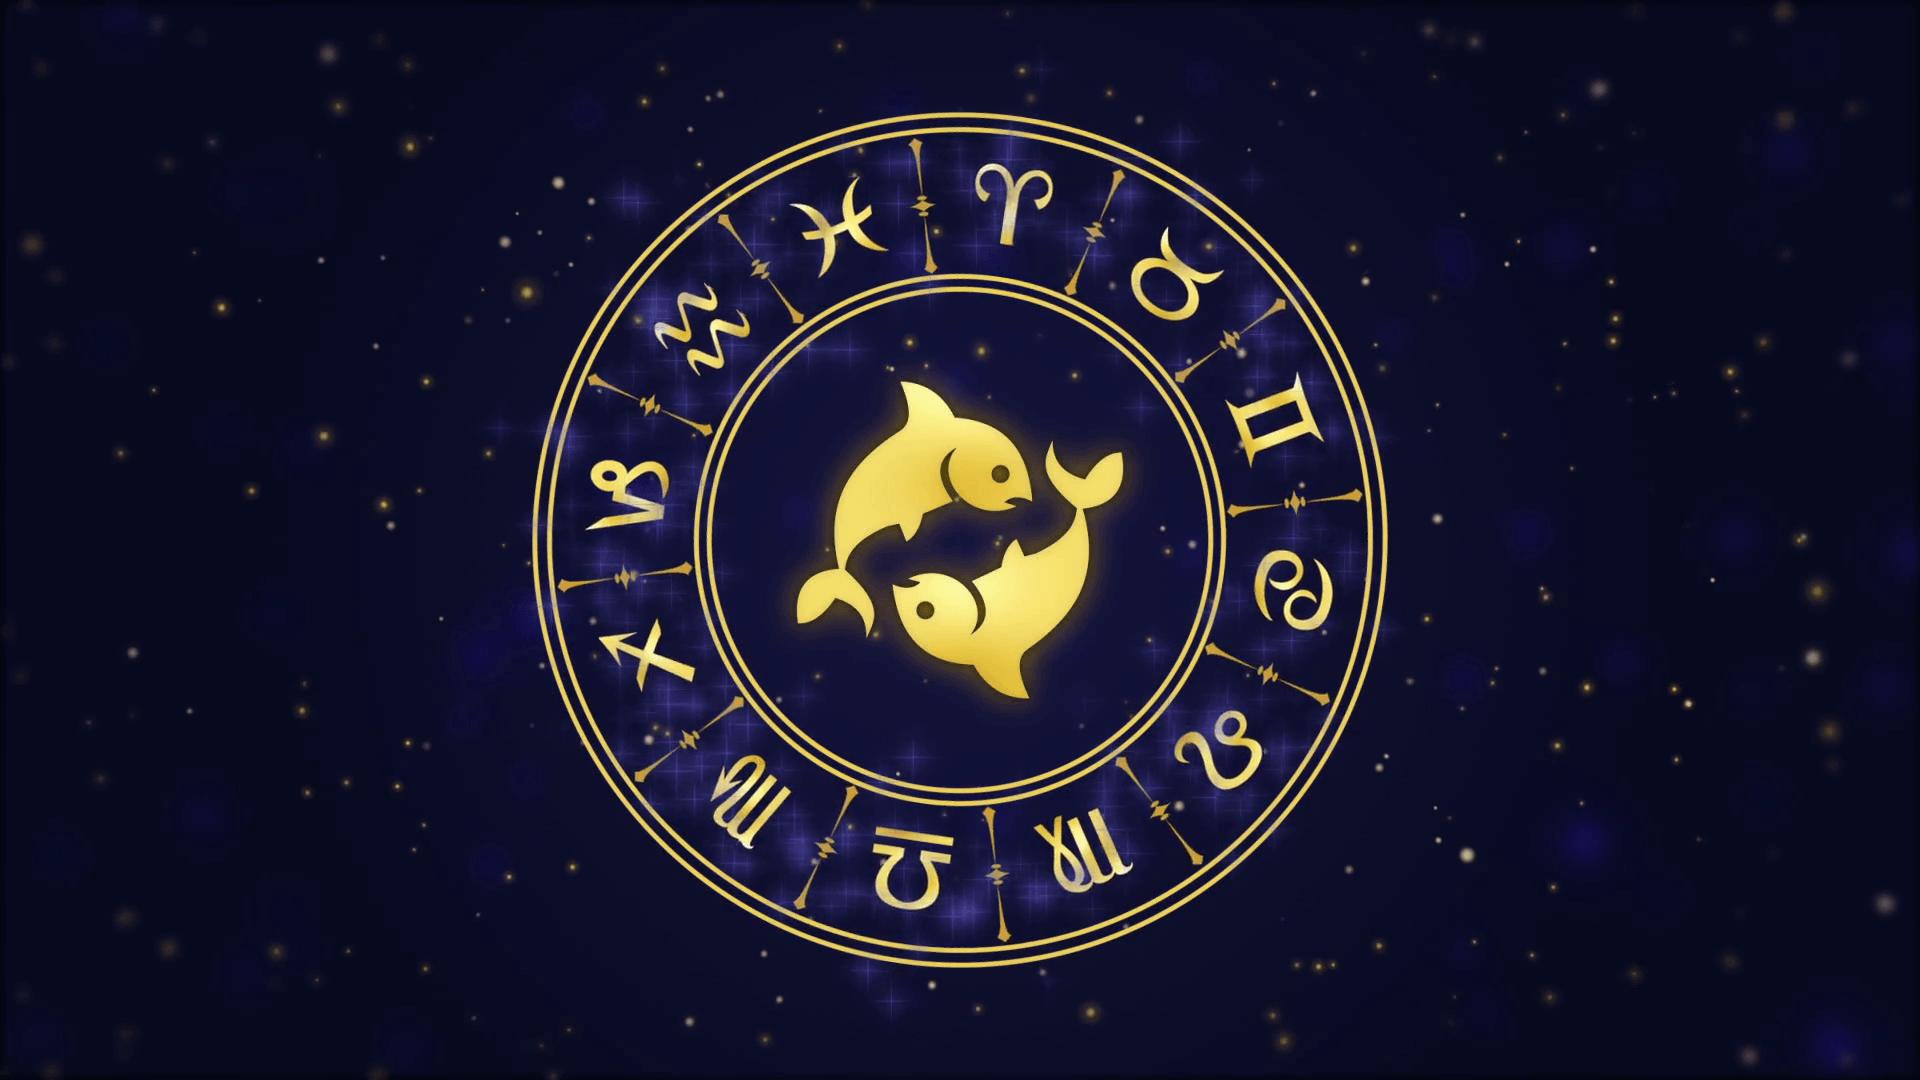 Zodiac sign Pisces and horoscope wheel on the dark blue background